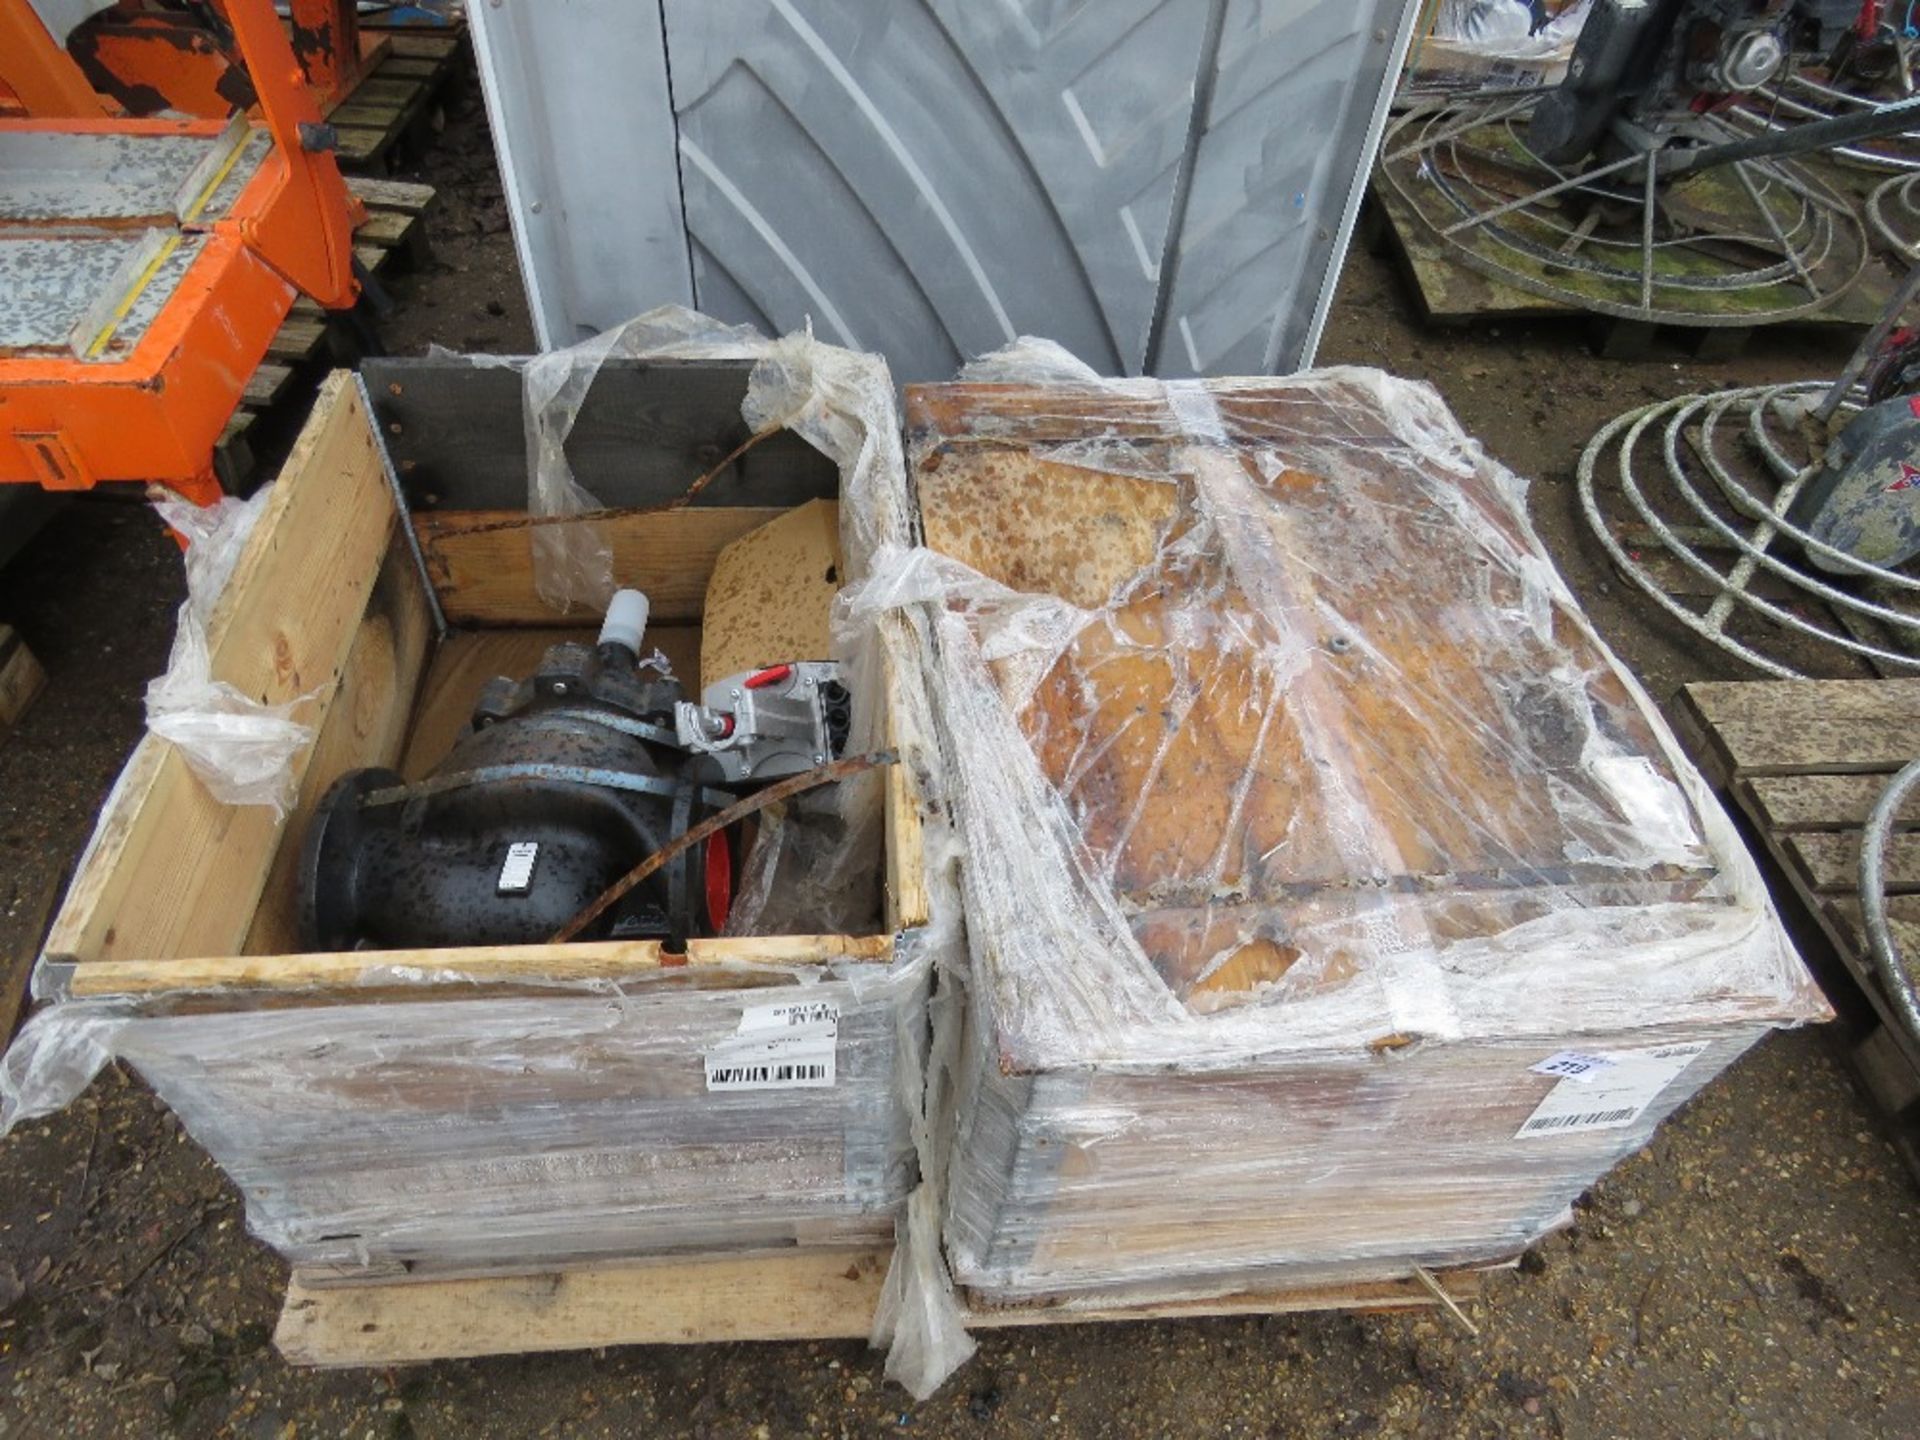 2 X LARGE FRESE 53-1203 GATE VALVES, BOXED, UNUSED. SOURCED FROM LARGE SCALE COMPANY LIQUIDATION.